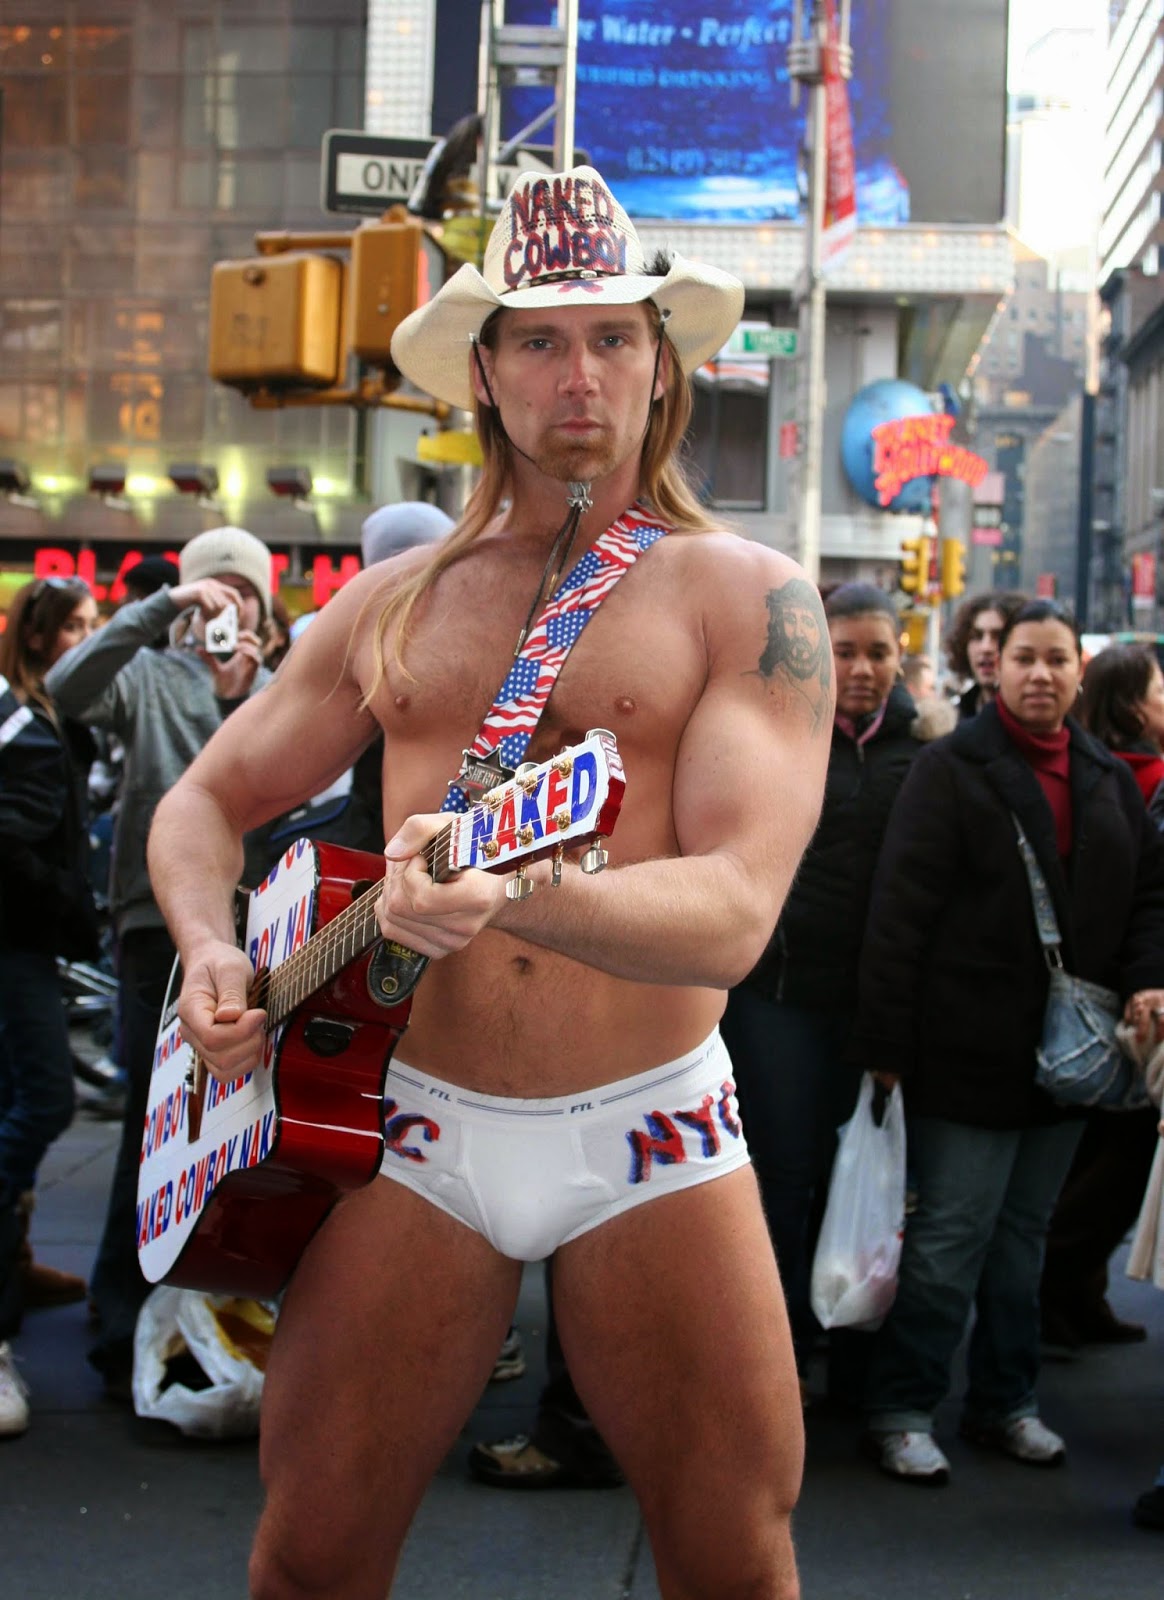 Crazed naked man brings Times Square to a standstill 